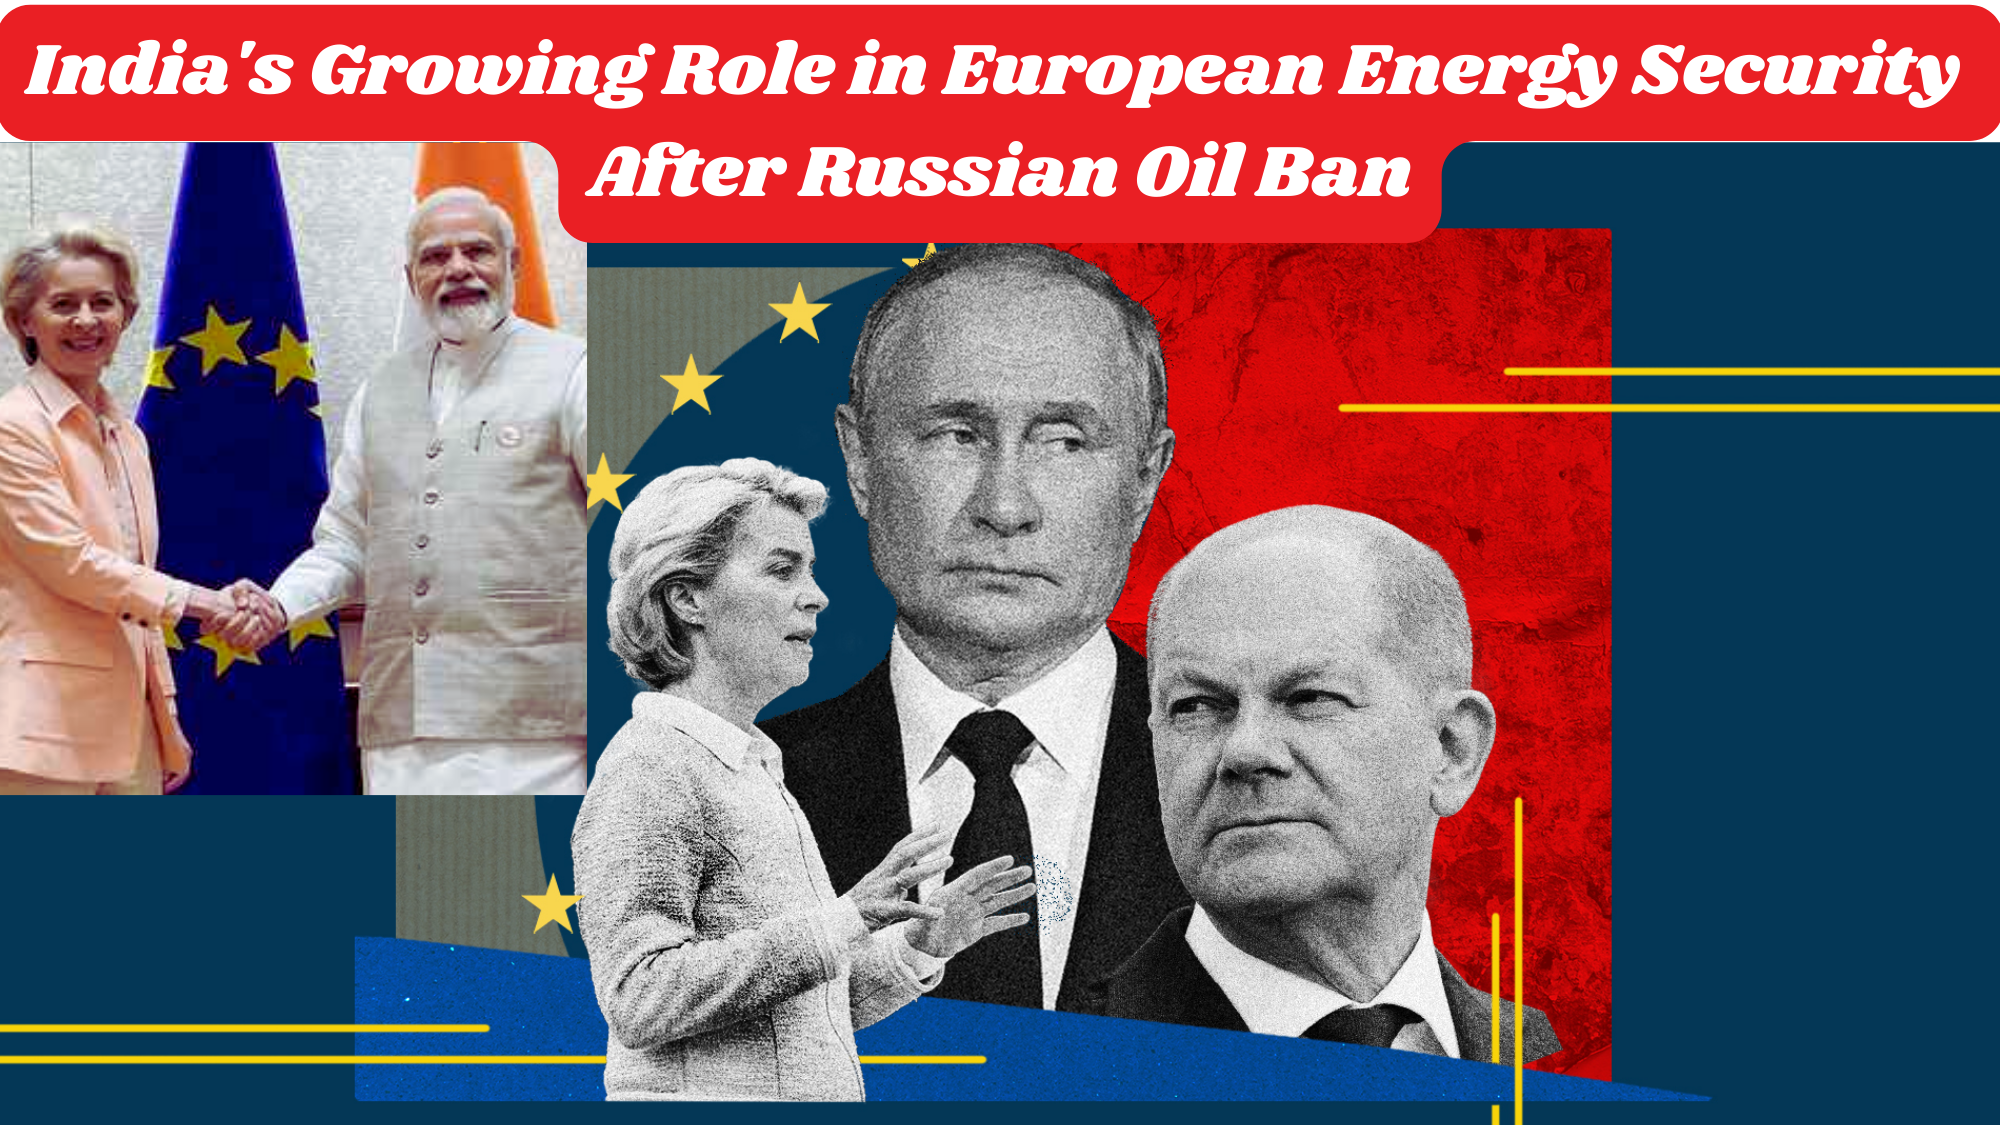 India's Growing Role in European Energy Security After Russian Oil Ban.